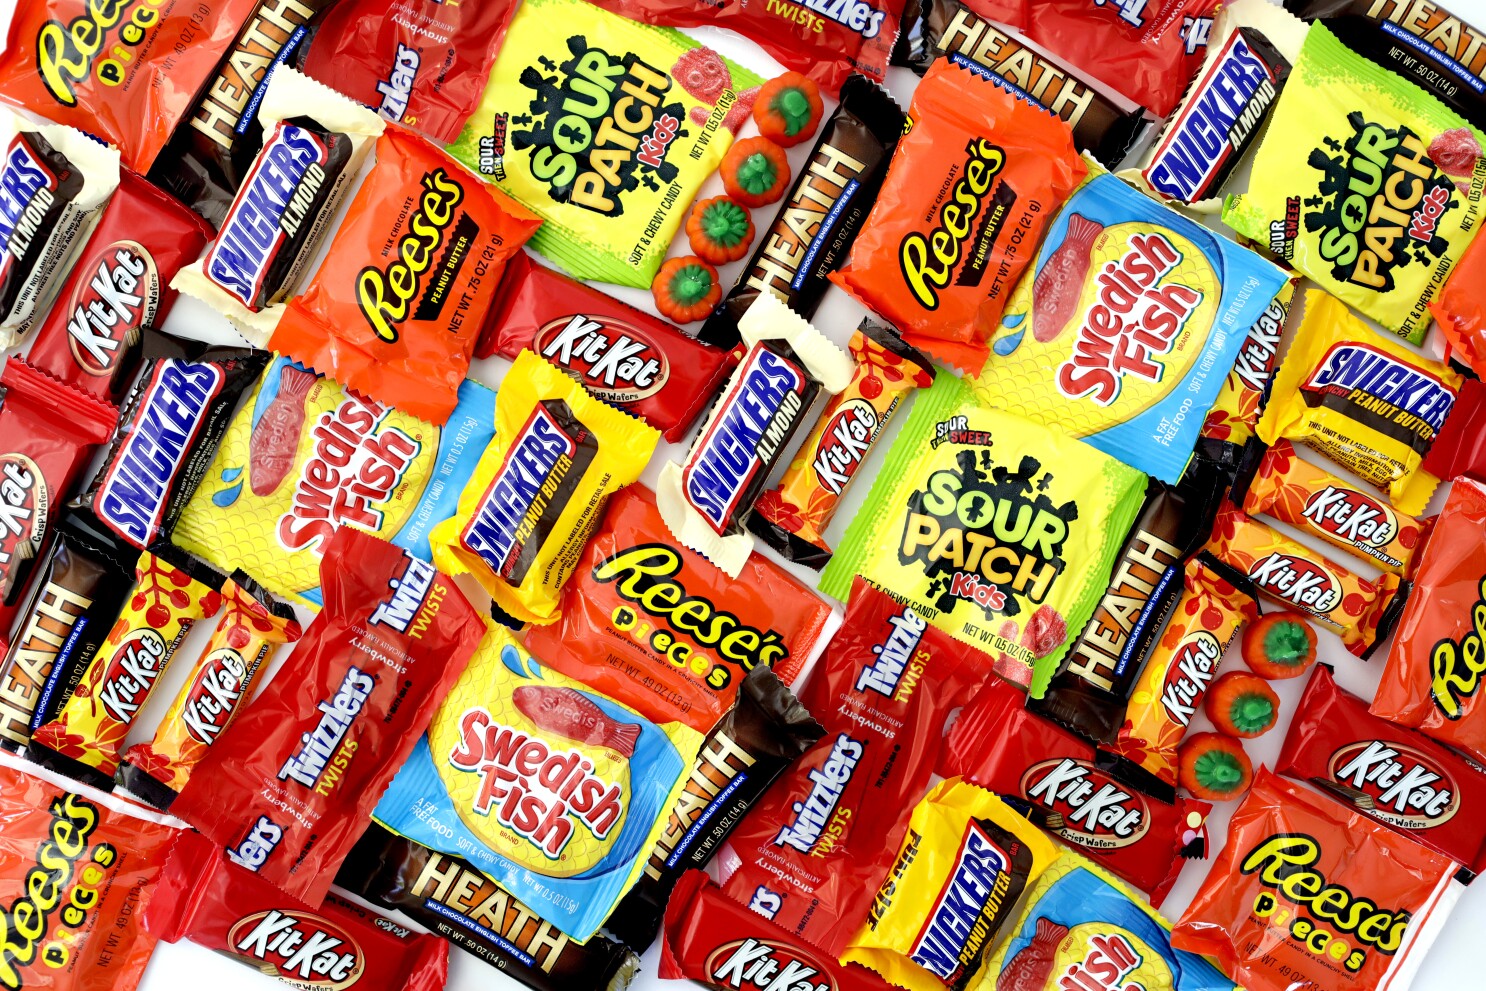 631678-fo-state-of-candy-07-1-mjc.jpg